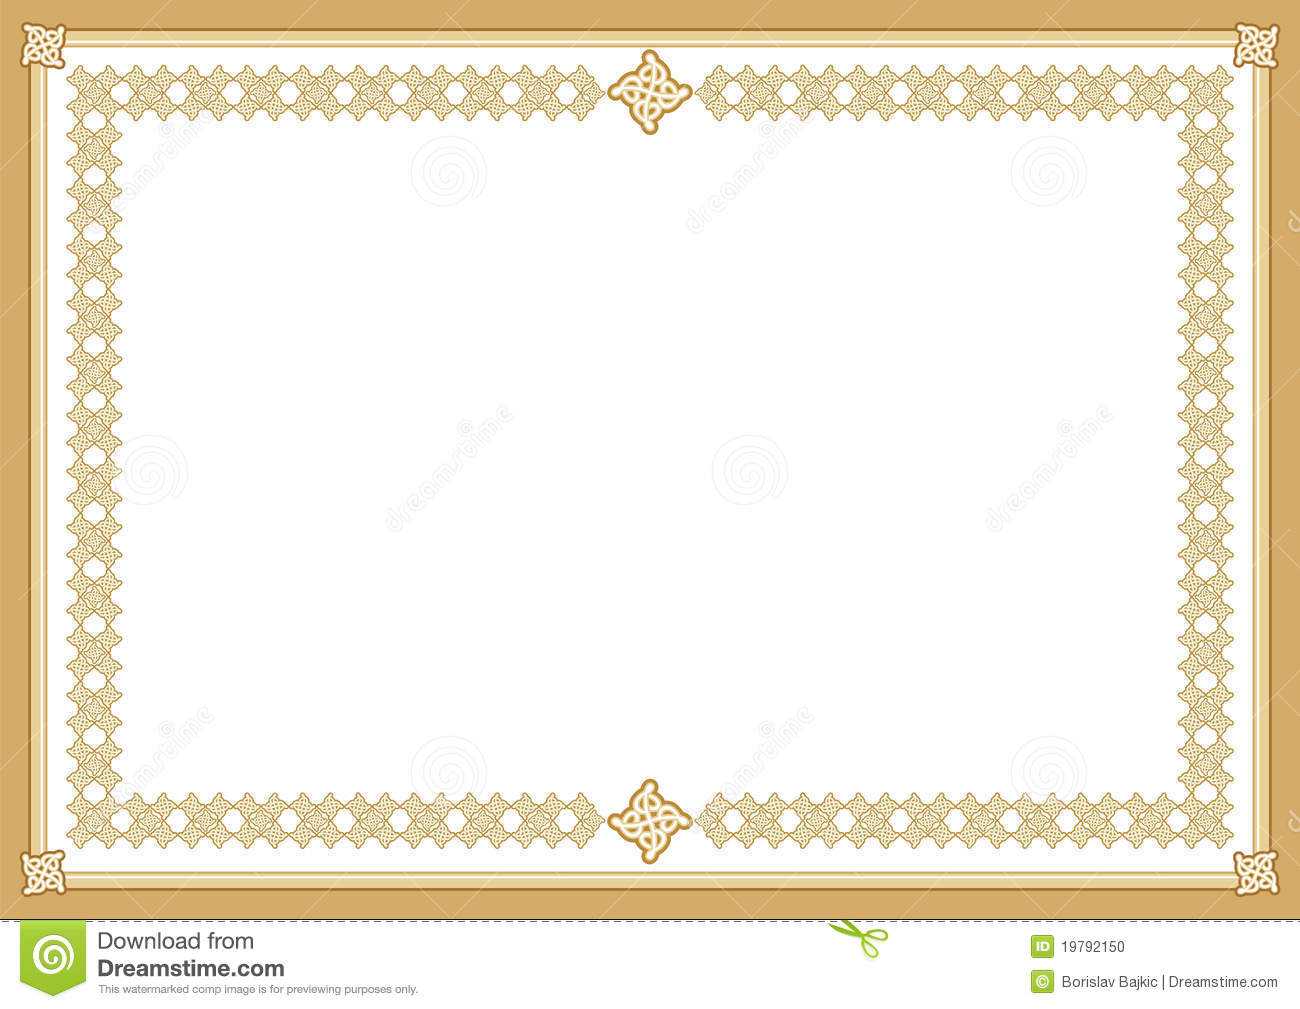 Certificate Stock Vector. Illustration Of Awards, Coloured Pertaining To Award Certificate Border Template